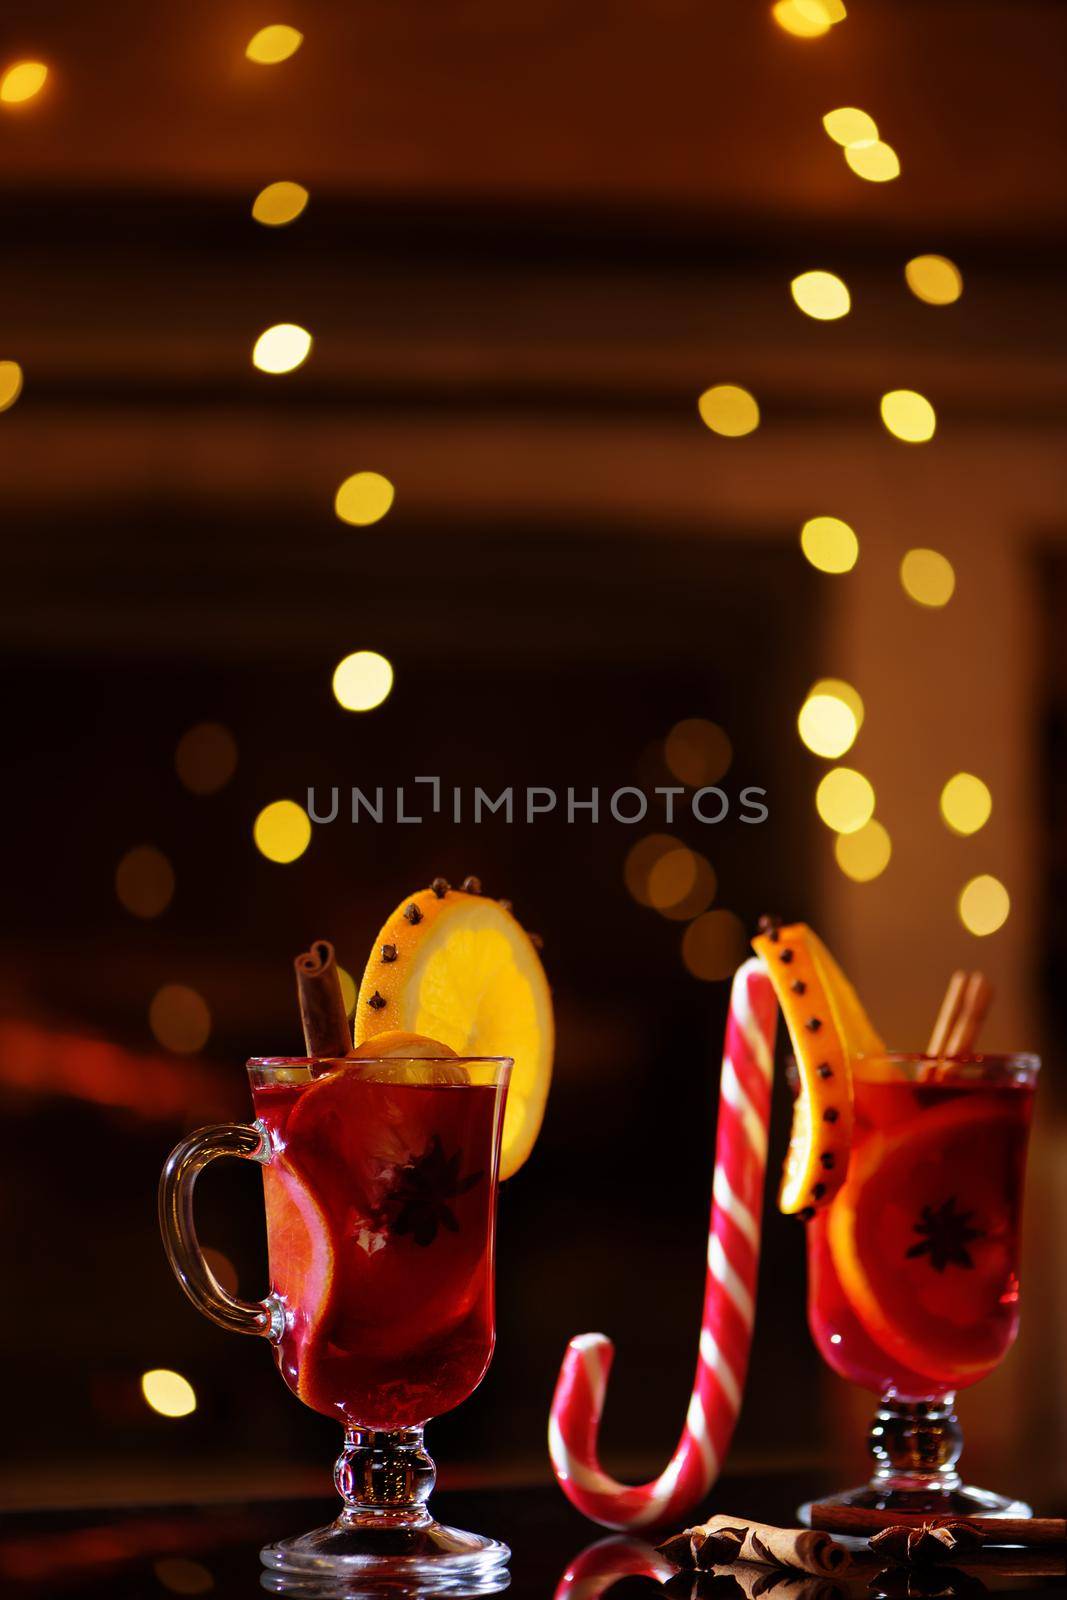 Delicious winter mulled wine with oranges at romantic fireplace with falling stars on background 3 by Alexxoma